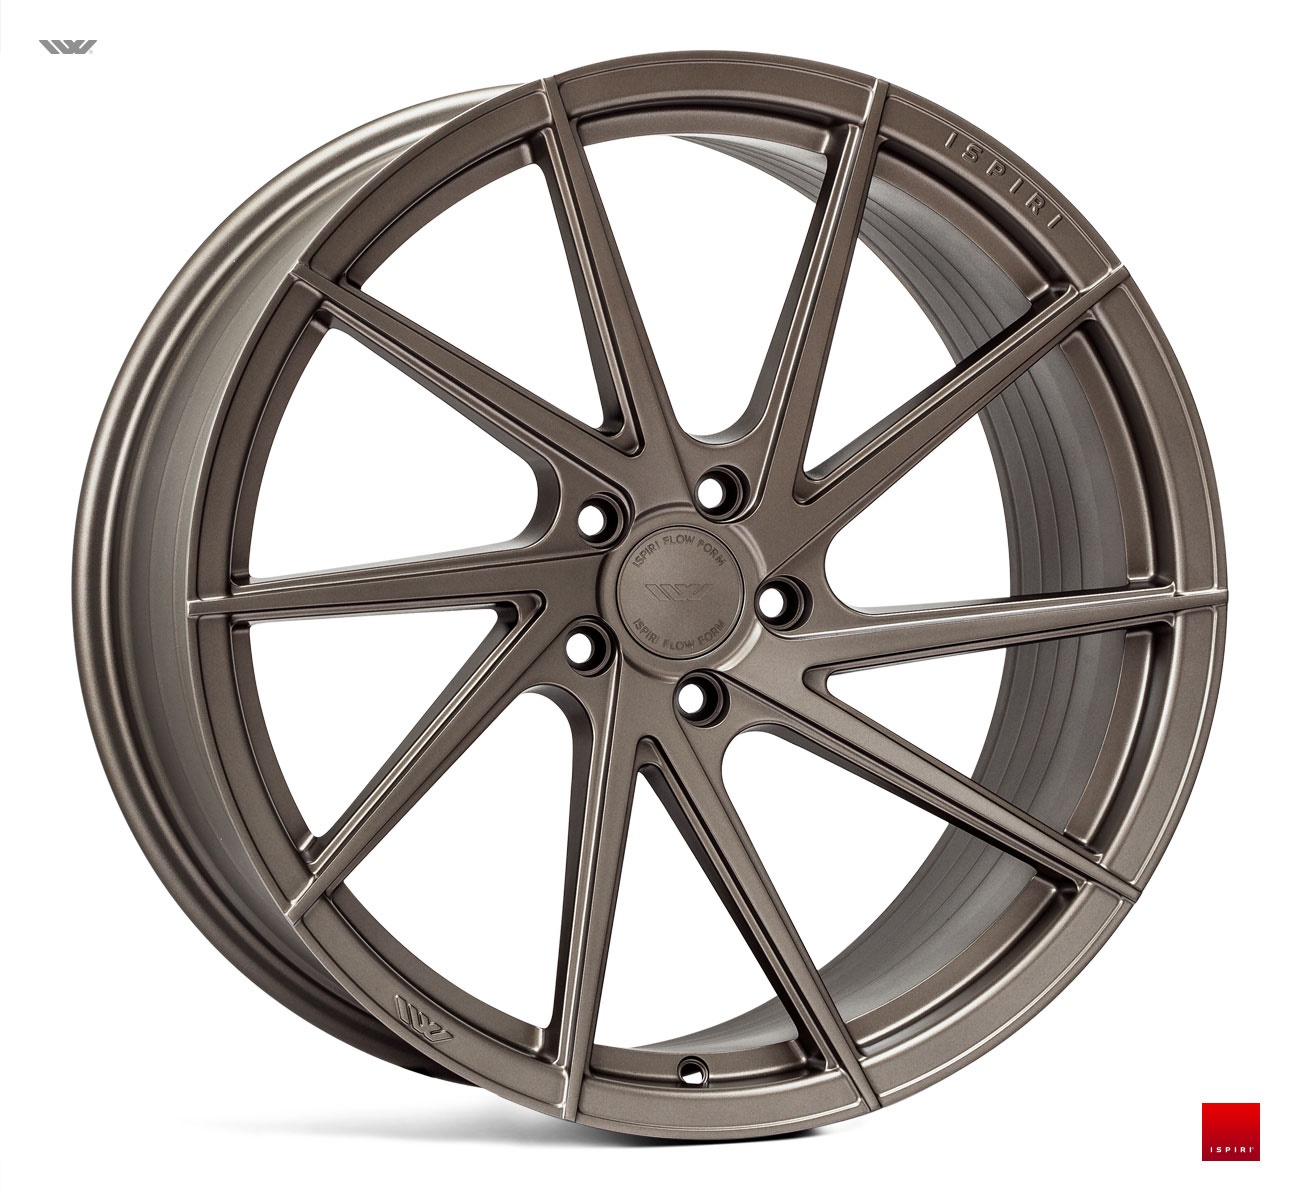 NEW 21  ISPIRI FFR1D DIRECTIONAL MULTI SPOKE ALLOY WHEELS IN MATT CARBON BRONZE  DEEPER CONCAVE 10 5  REARS   VARIOUS FITMENTS AVAILABLE